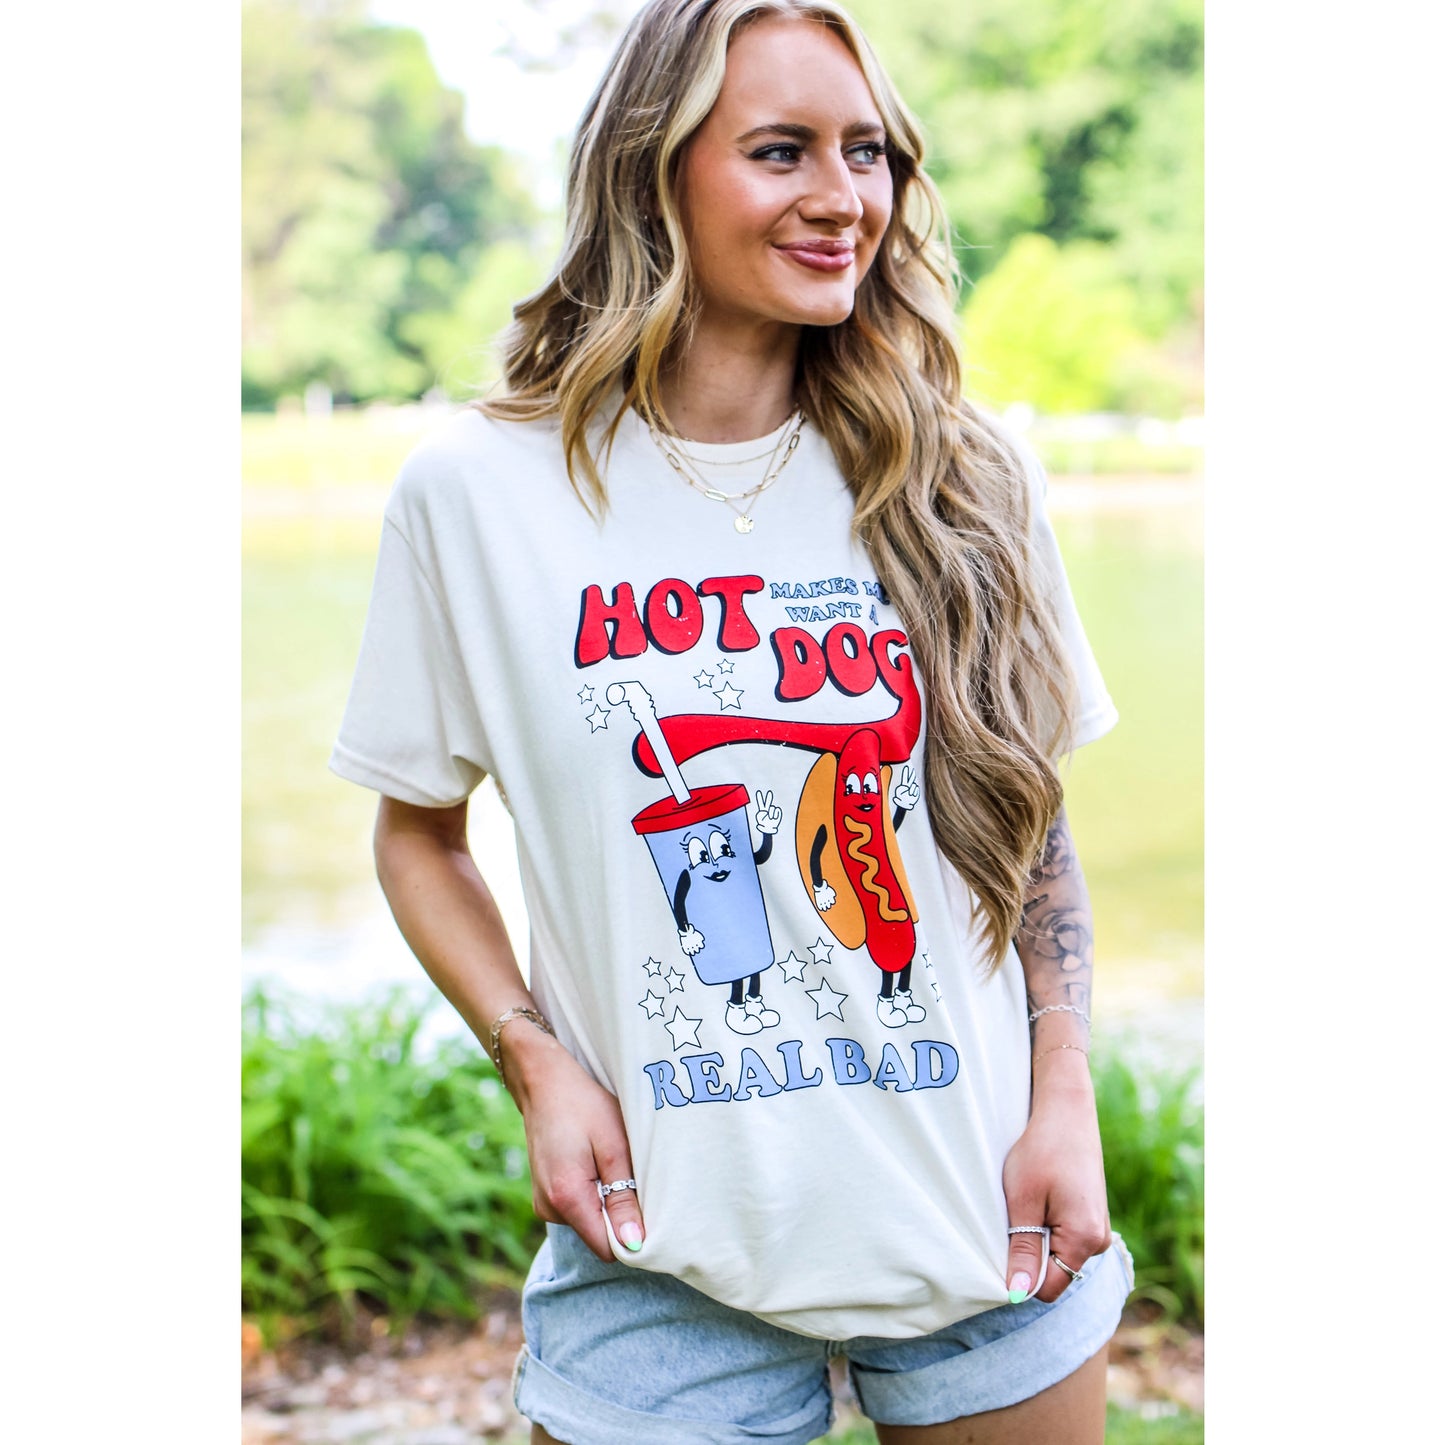 Legally Blonde 4th of July Tee